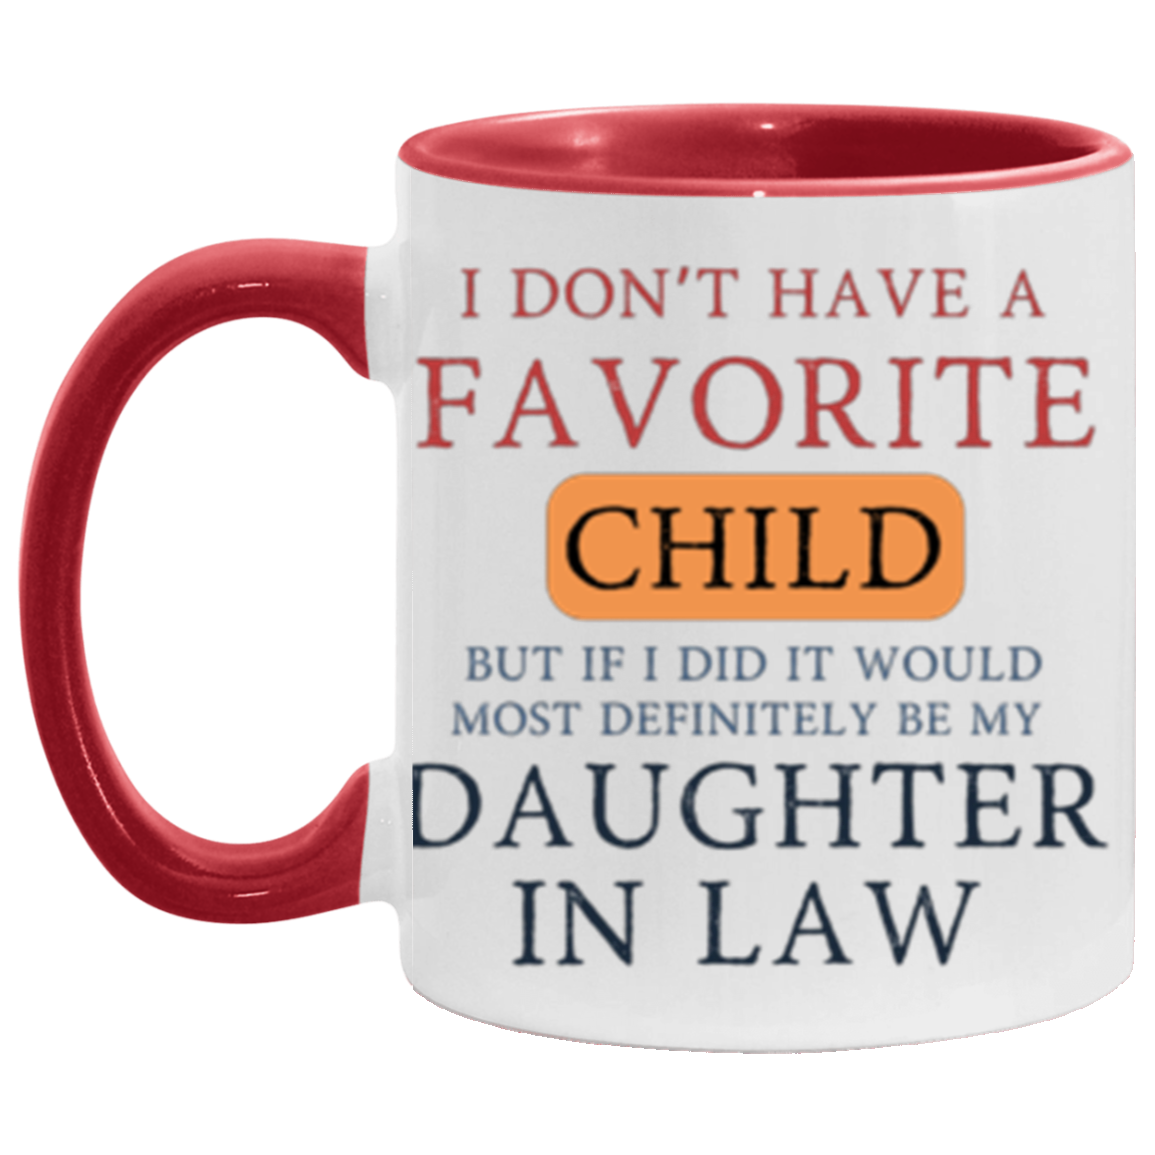 I Don't Have A Favorite Child, But If I Did It Would Be My Daughter in Law 11oz Mug